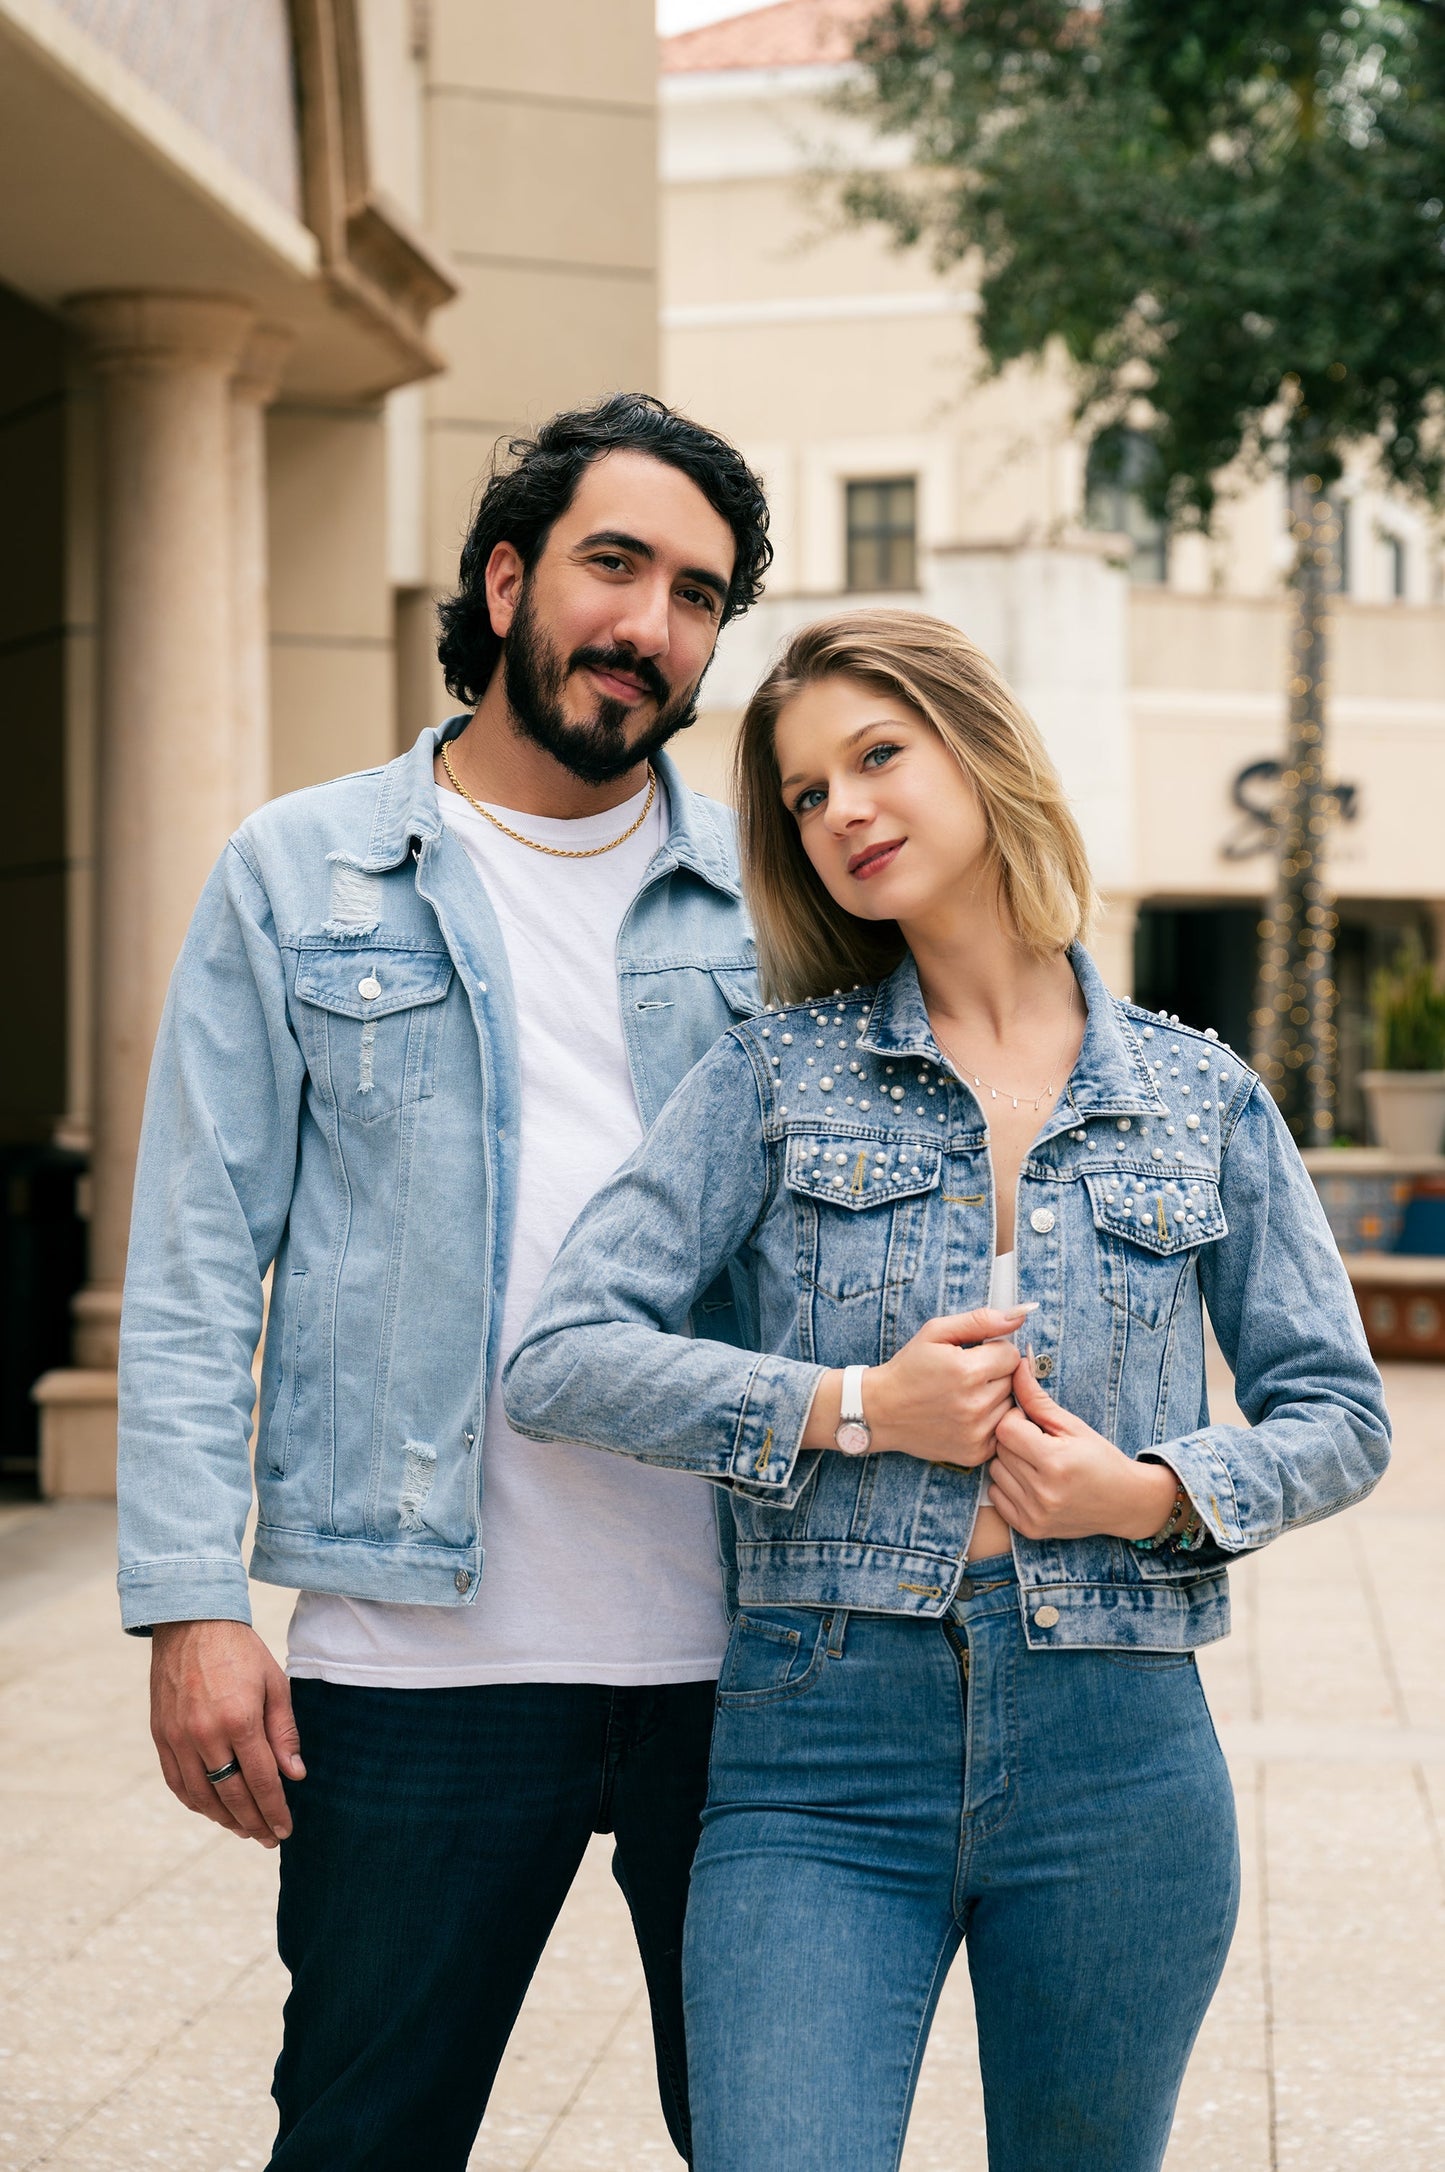 Just Married Custom Denim Jackets for Couple - pearls jacket